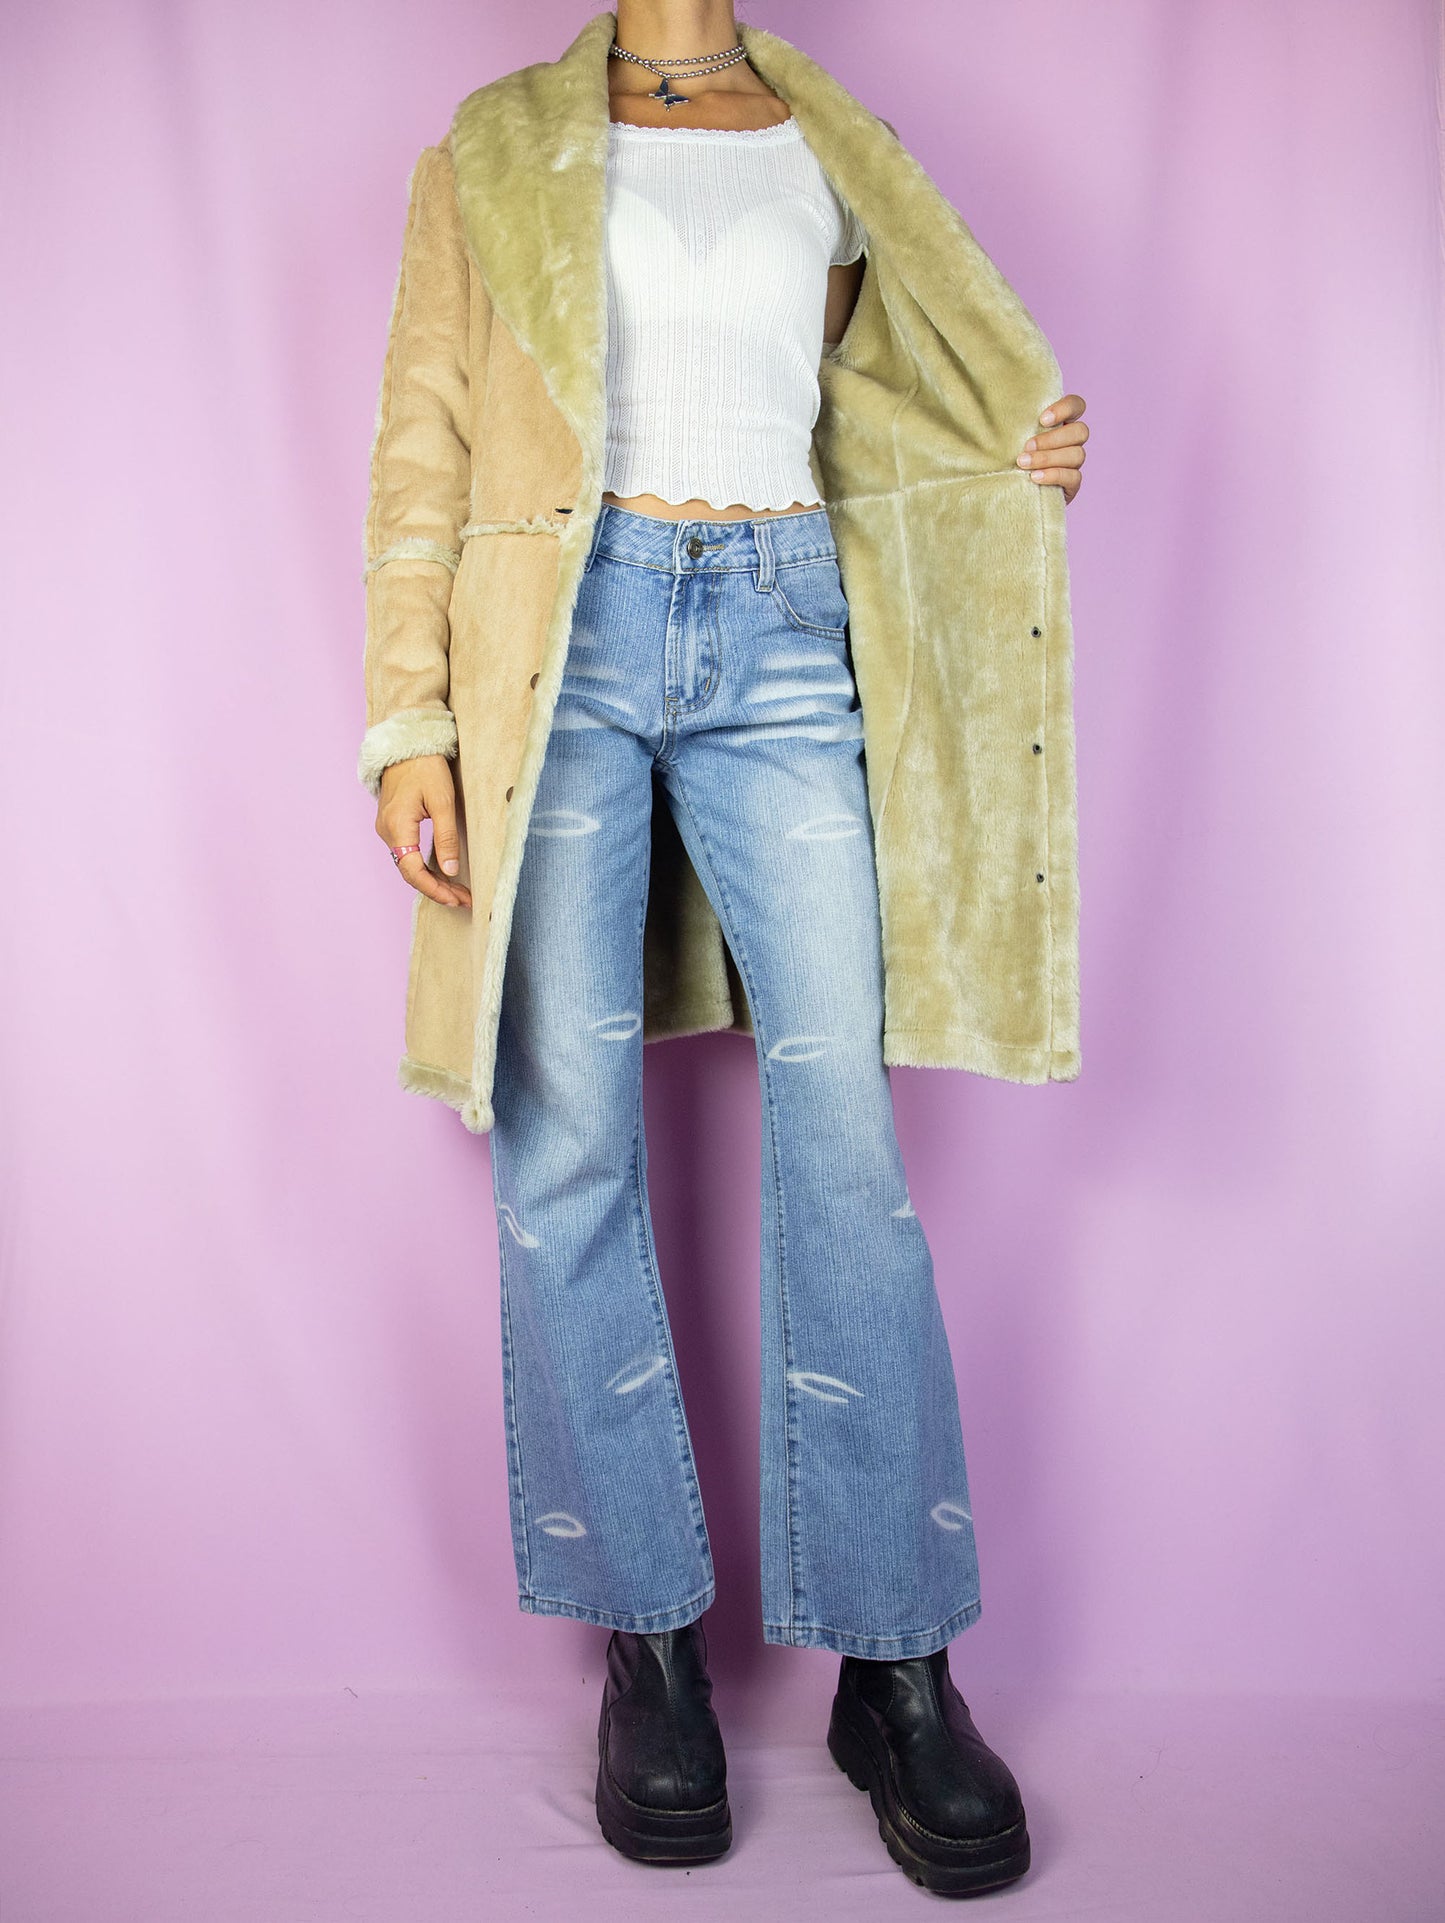 The Y2K Faux Suede Beige Coat is a vintage 2000s winter faux suede statement coat with faux fur lining, v-neck, and snap-button closure.